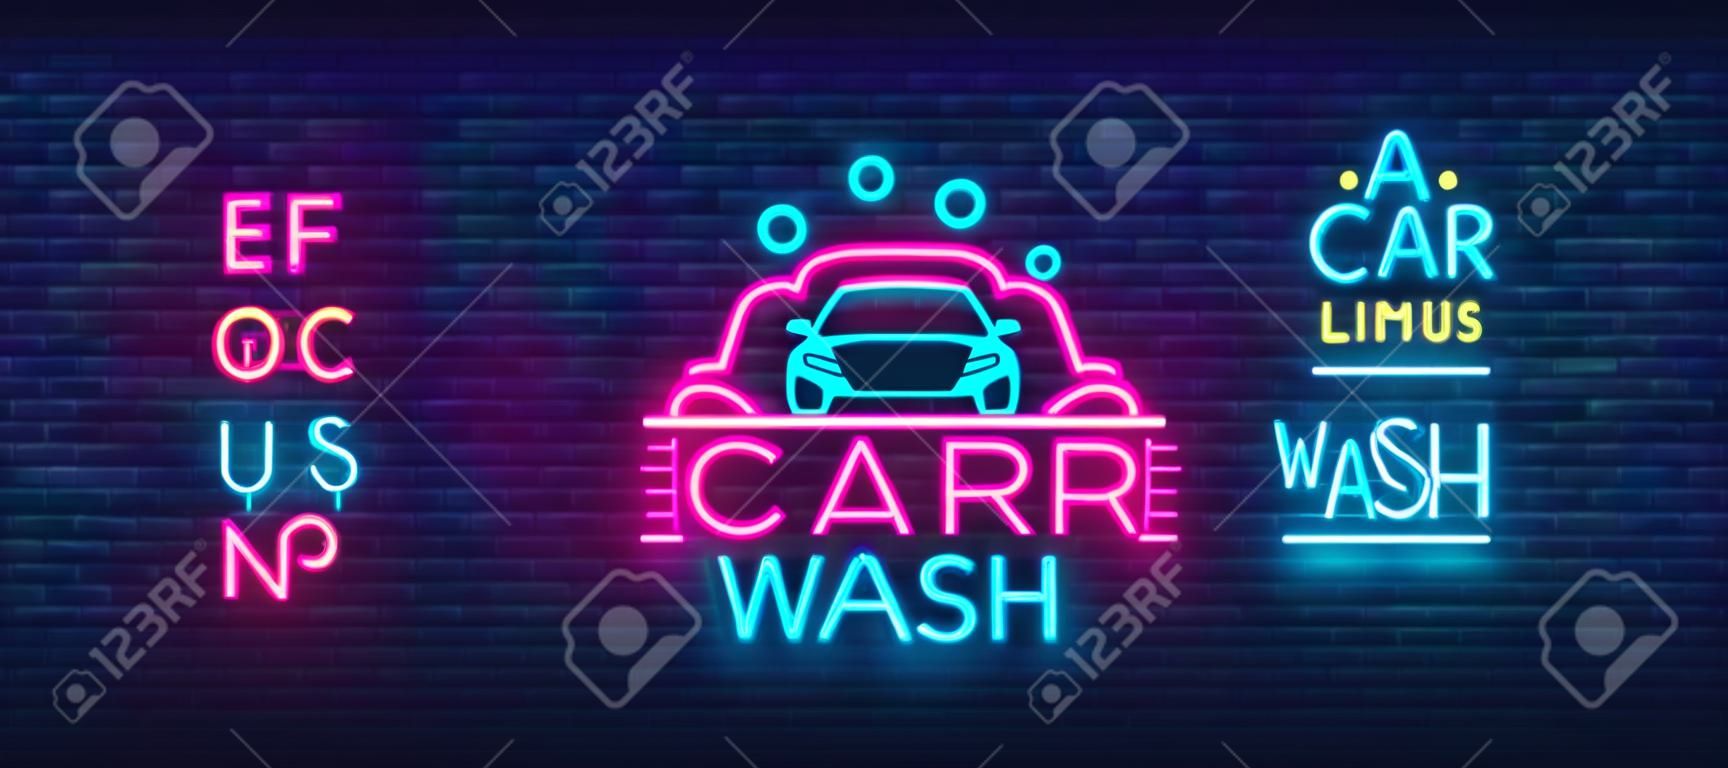 Car wash logo vector design in neon style vector illustration isolated. Template, concept, luminous signboard icon on a car wash theme. Luminous banner. Editing text neon sign. Neon alphabet